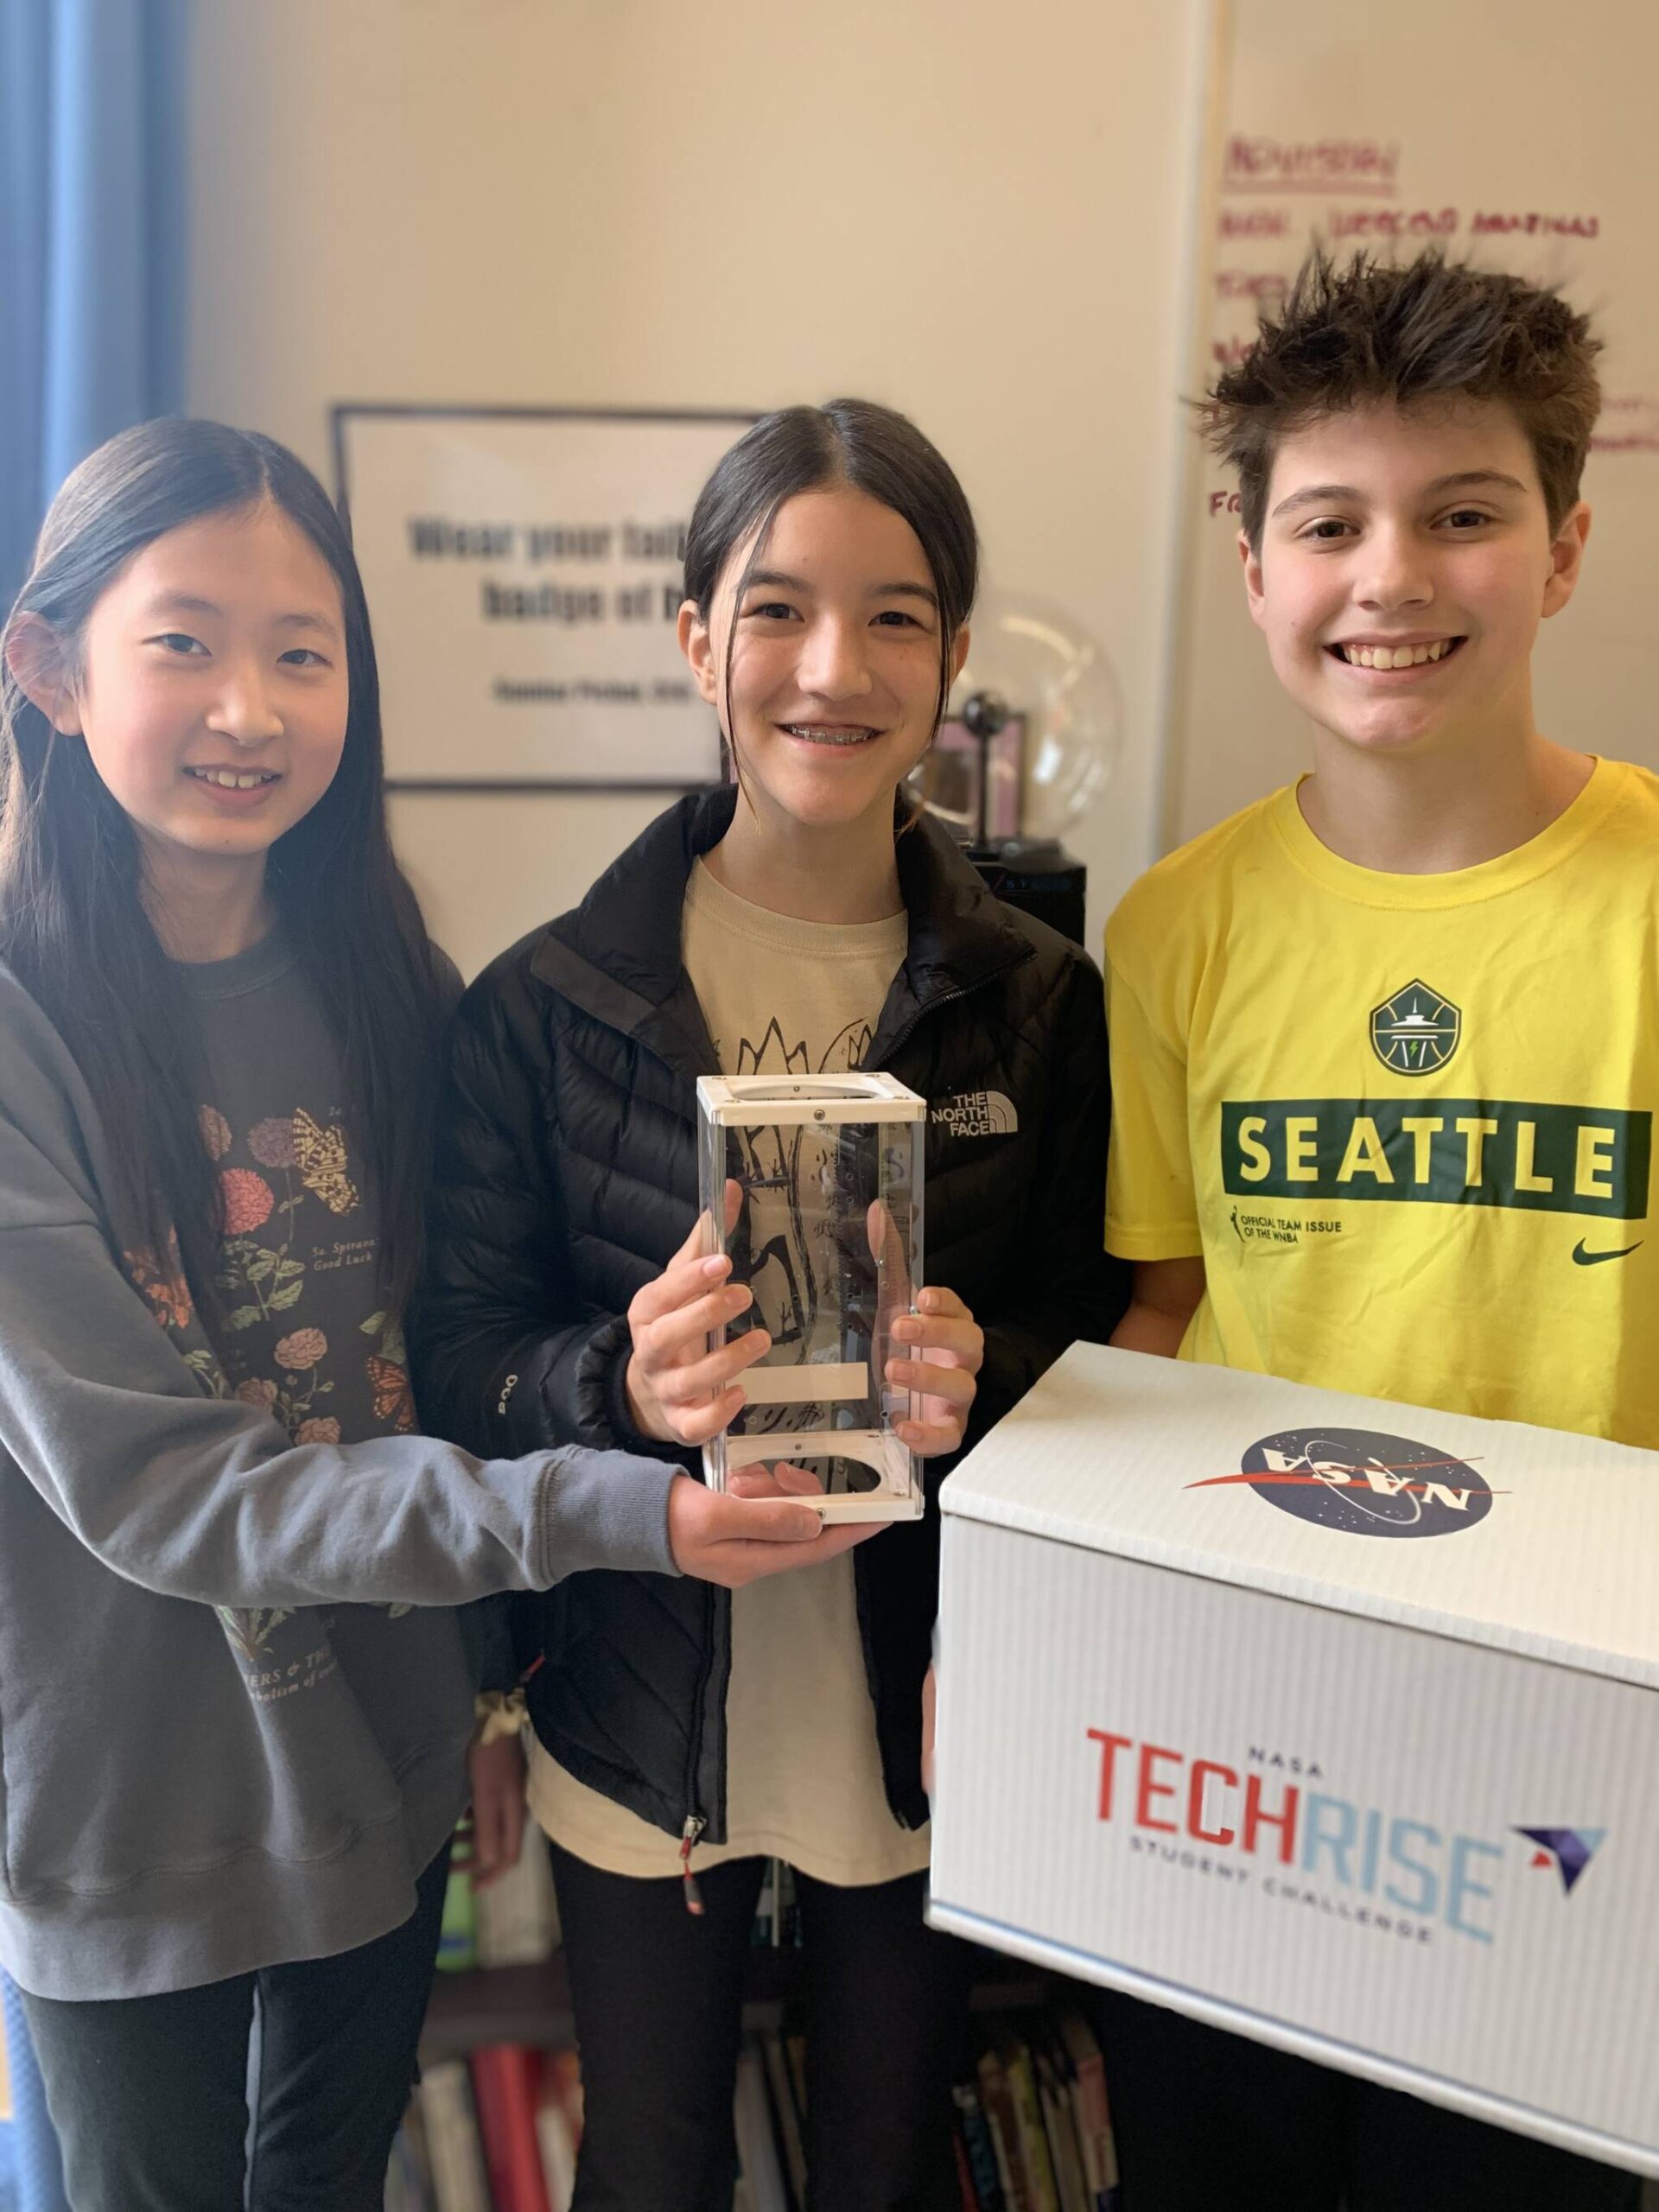 From left to right, Mercer Islanders Kaitlyn Chu, Ellie Klesert and Nova Hagen are members of the winning LUMINAS team in NASA’s TechRise competition. Courtesy photo